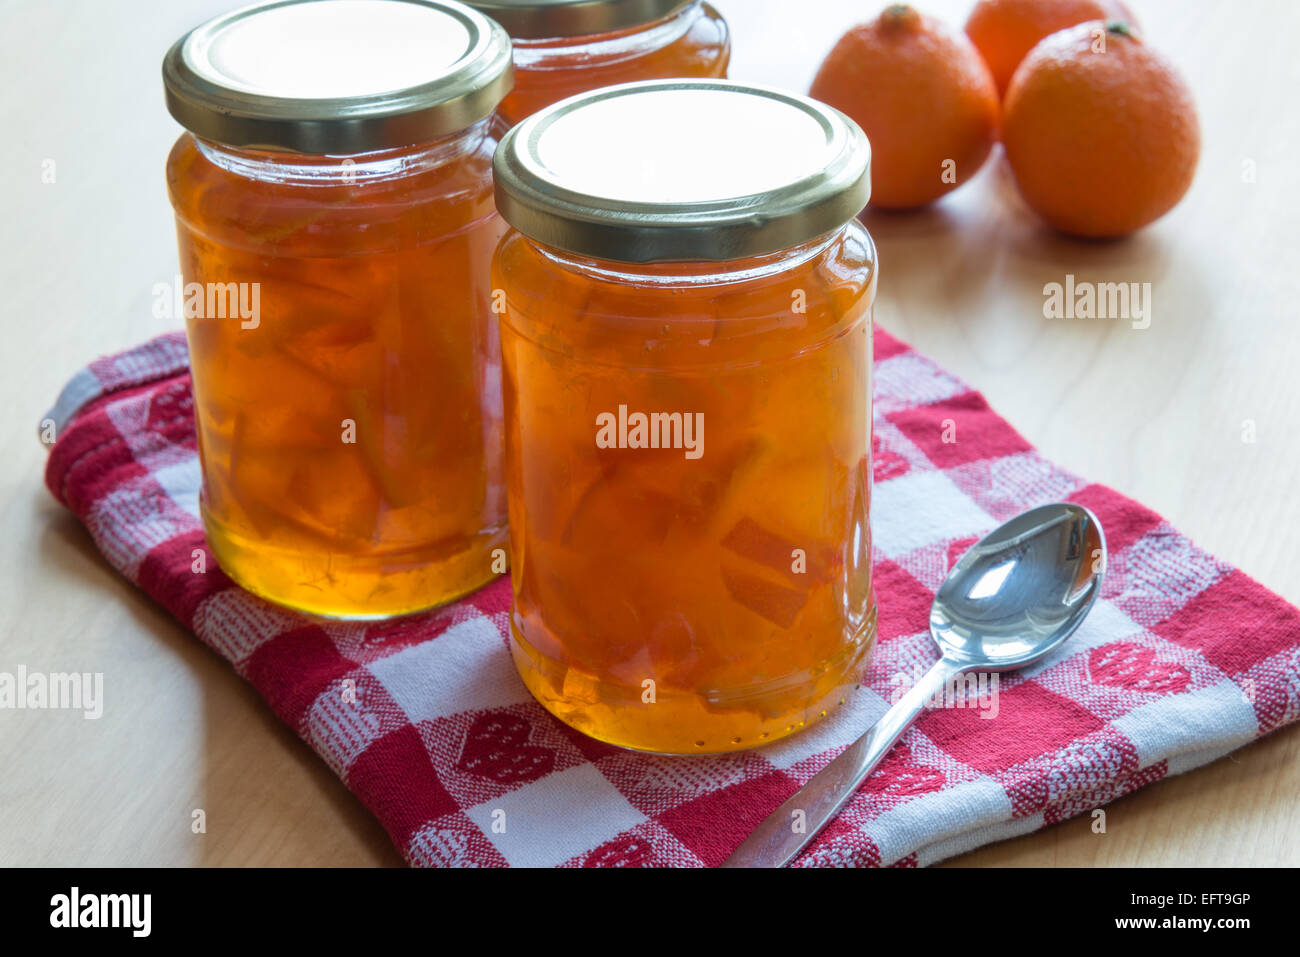 Jars of homemade Seville orange and clementine marmalade. Stock Photo